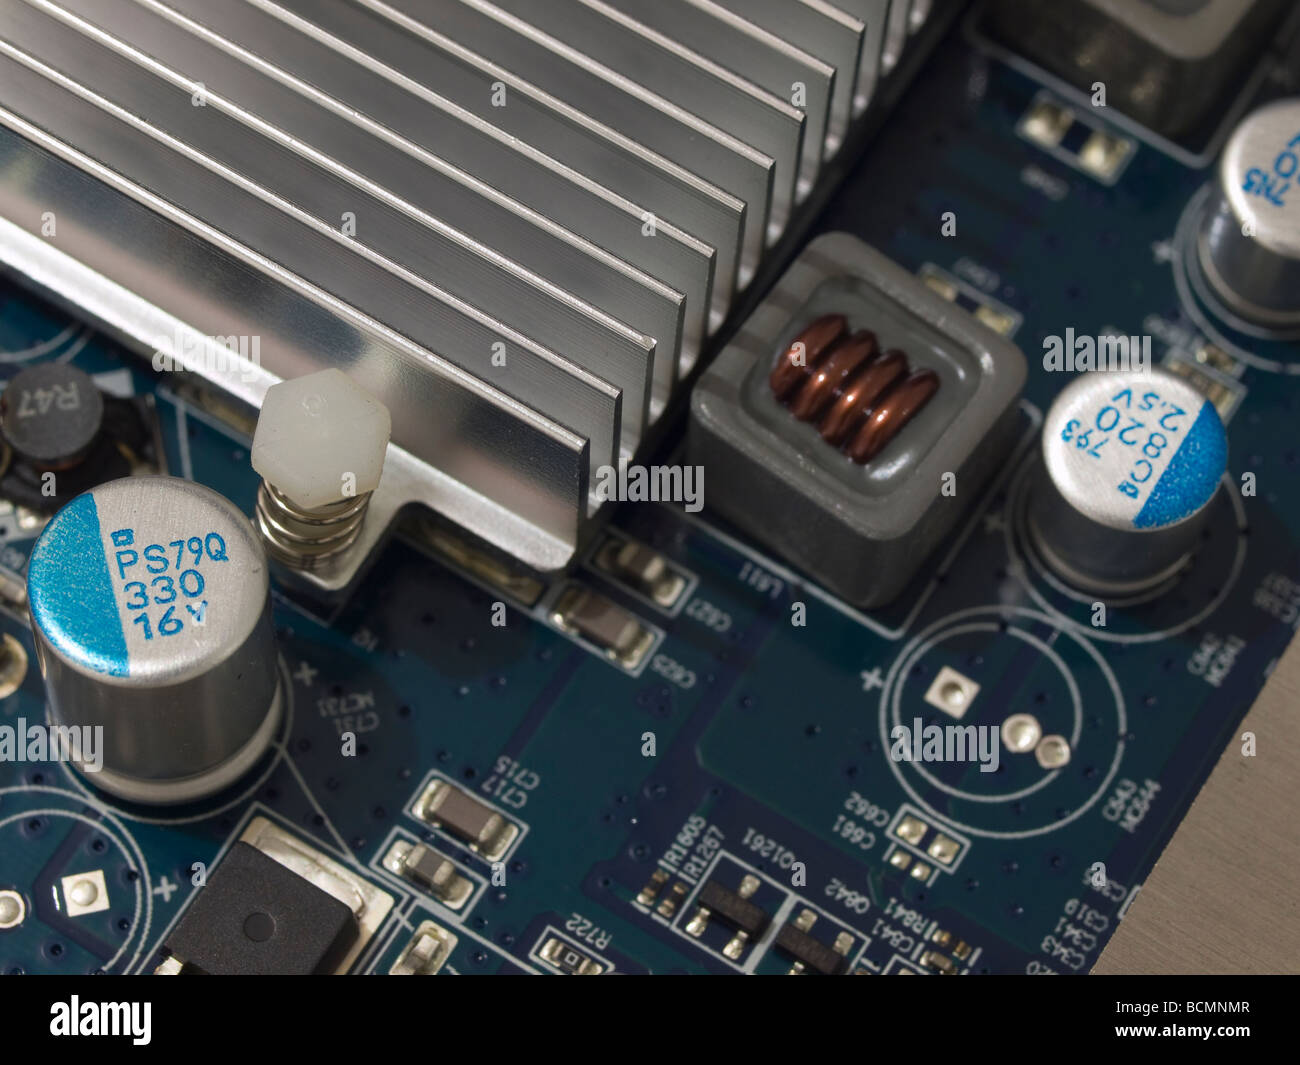 Close-up image of a Sapphire Radeon HD 3870 Ultimate Edition graphic card. Stock Photo